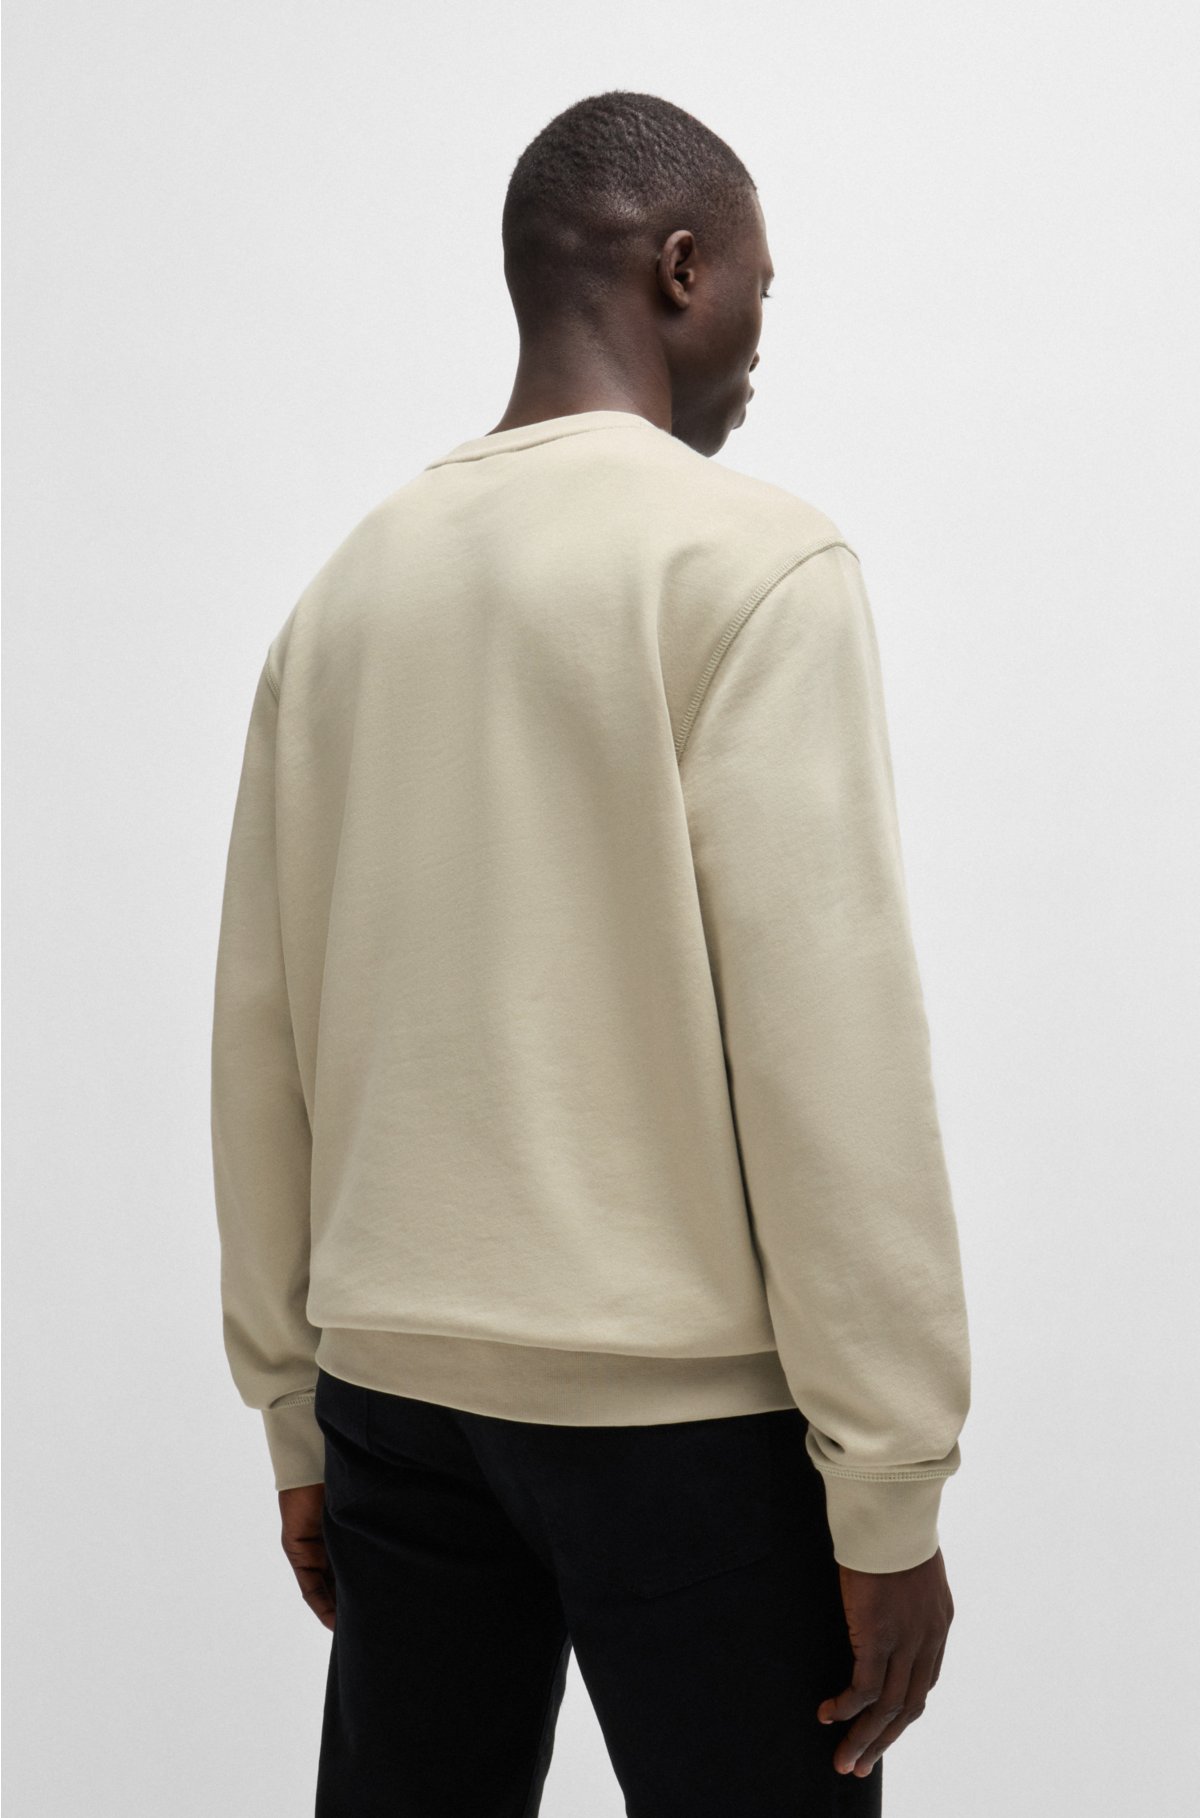 Relaxed Fit Sweatshirt - Cream/Keith Haring - Men